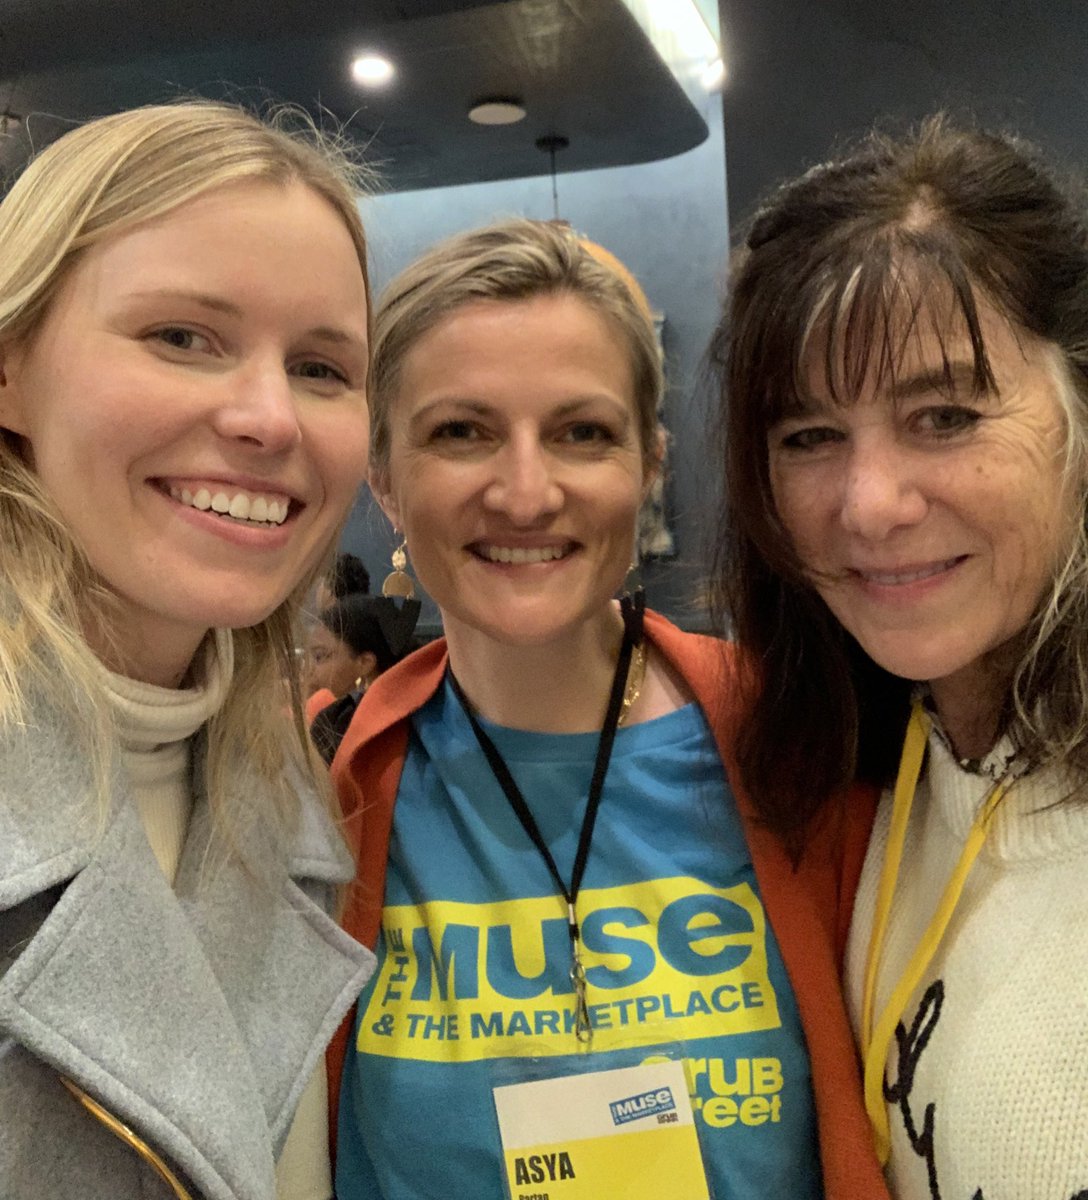 Very fun first day at #muse24 @GrubWriters 📚✍️! Great to see old writer friends and make new ones. @BMatteau @apartan